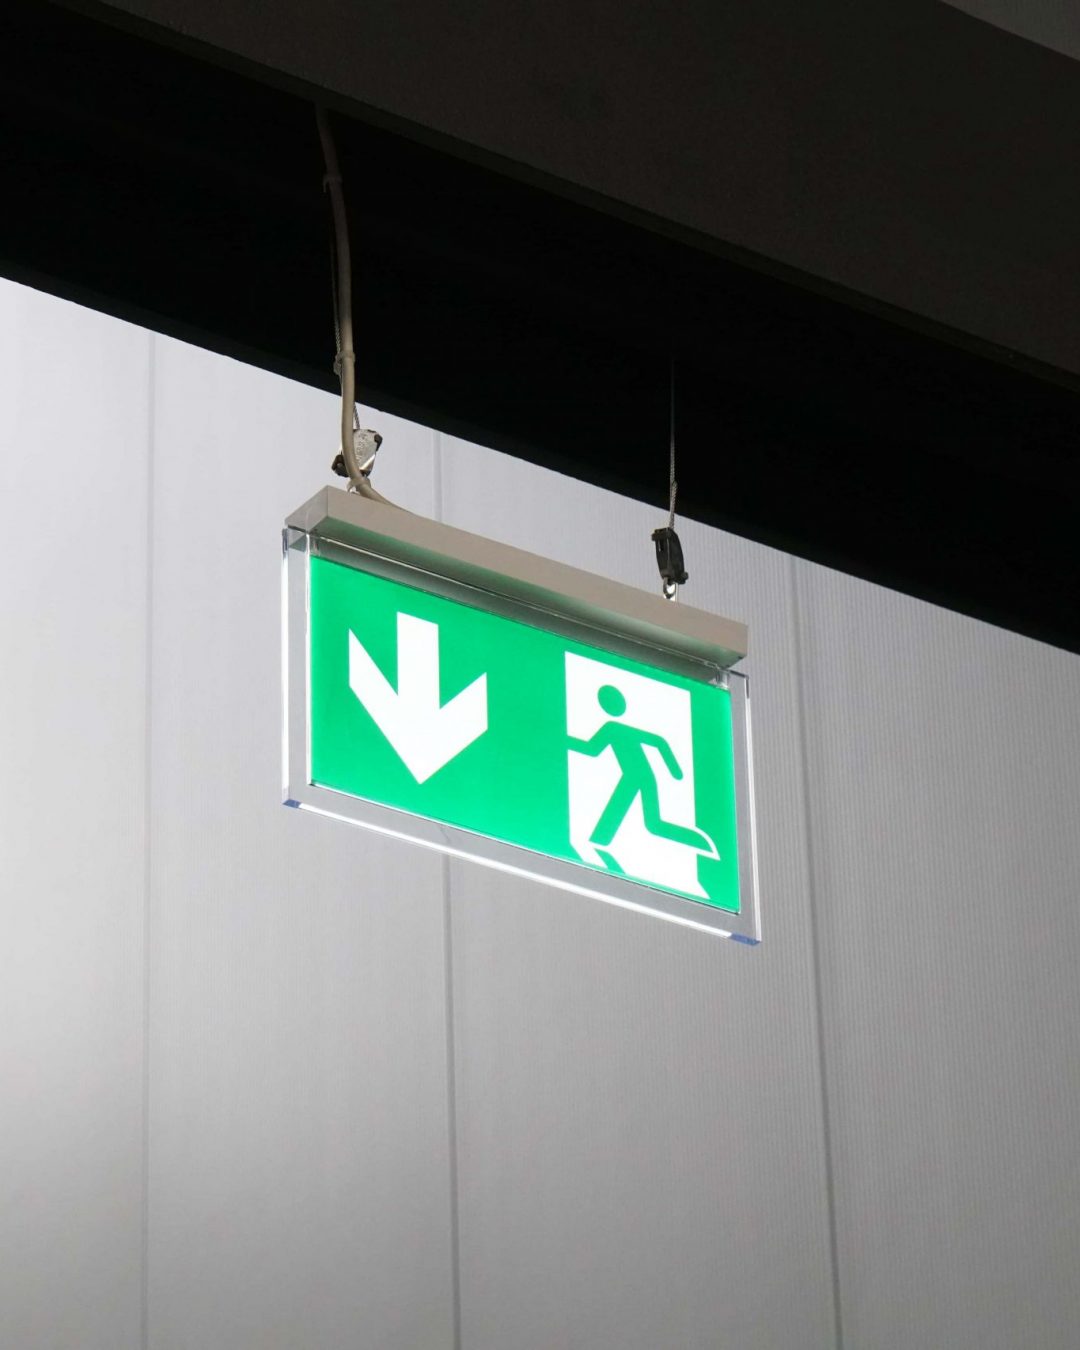 emergency exit or fire escape sign with green running man symbol and directional arrow hanging from ceiling